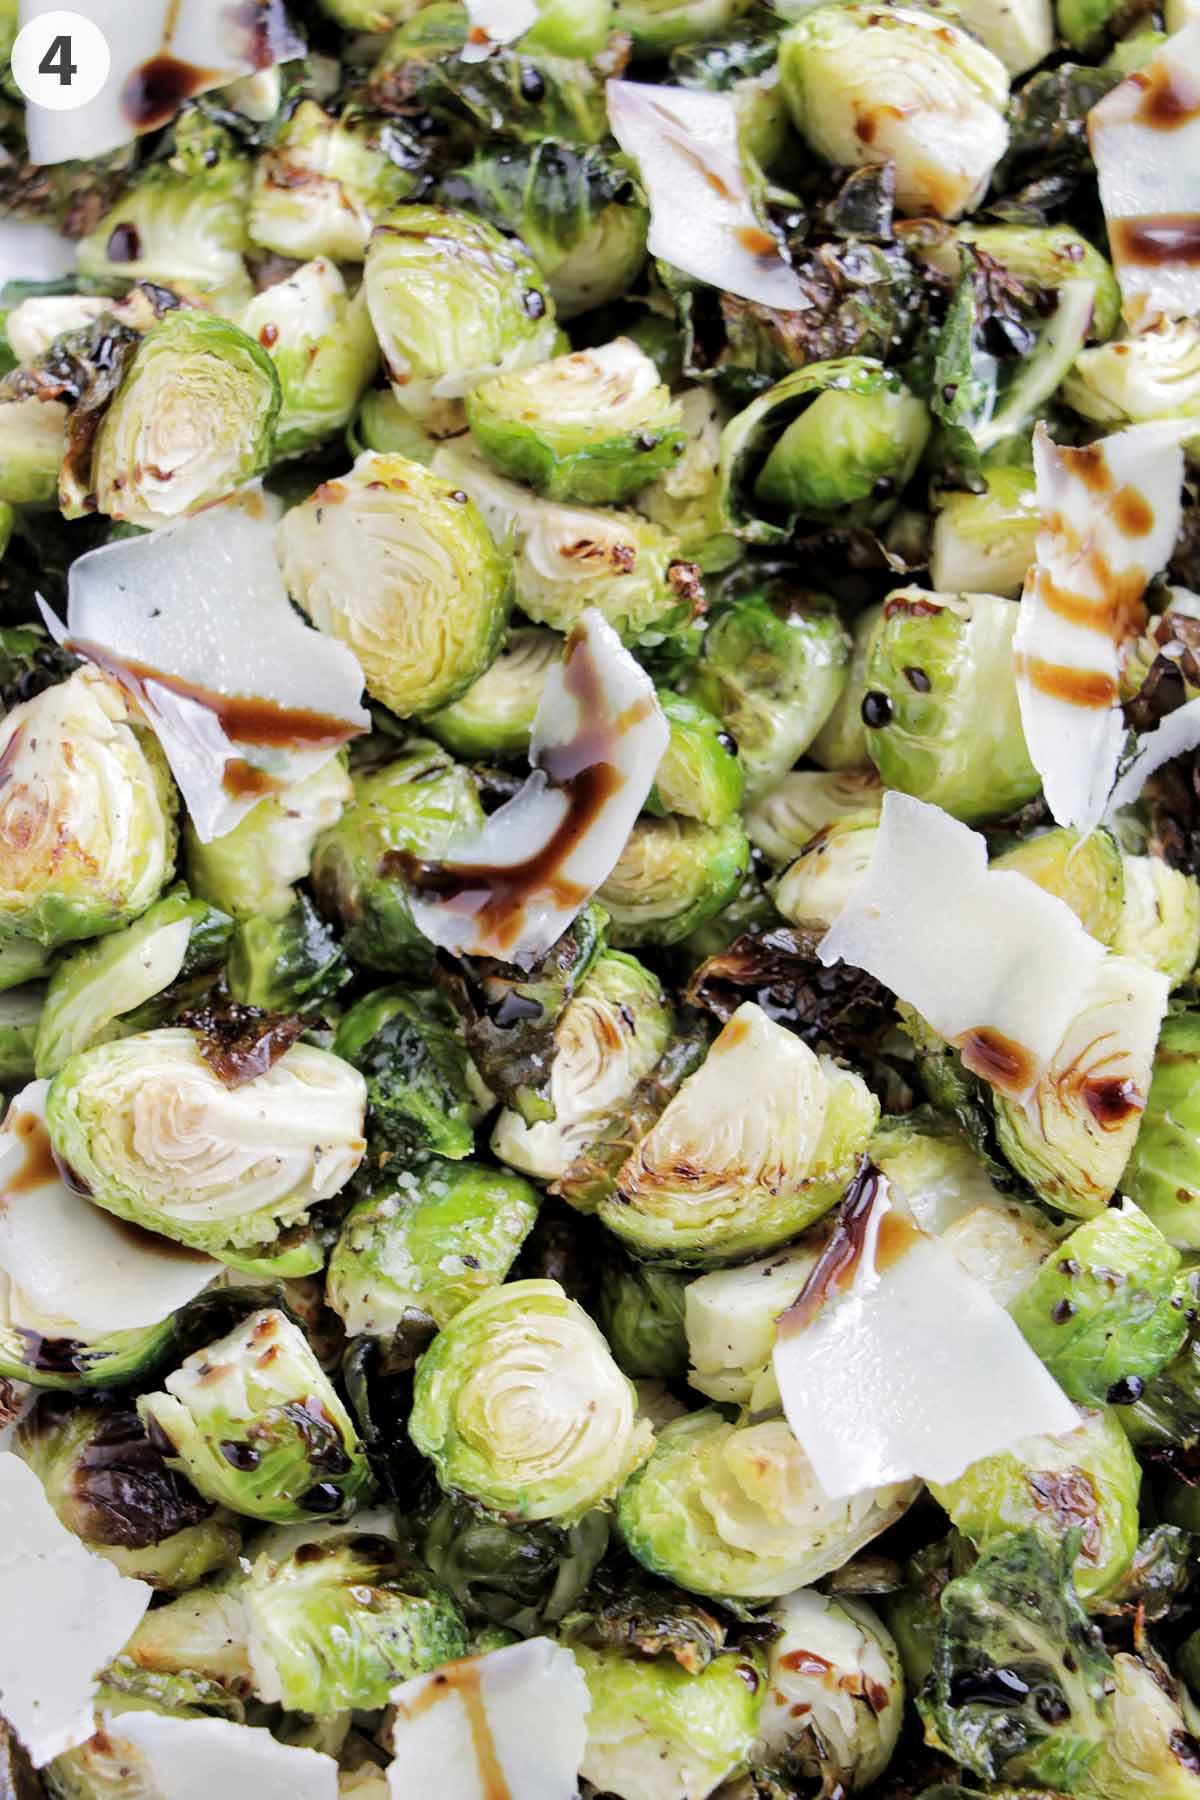 numbered photo showing brussel sprouts topped with balsamic glaze and parmesan cheese.